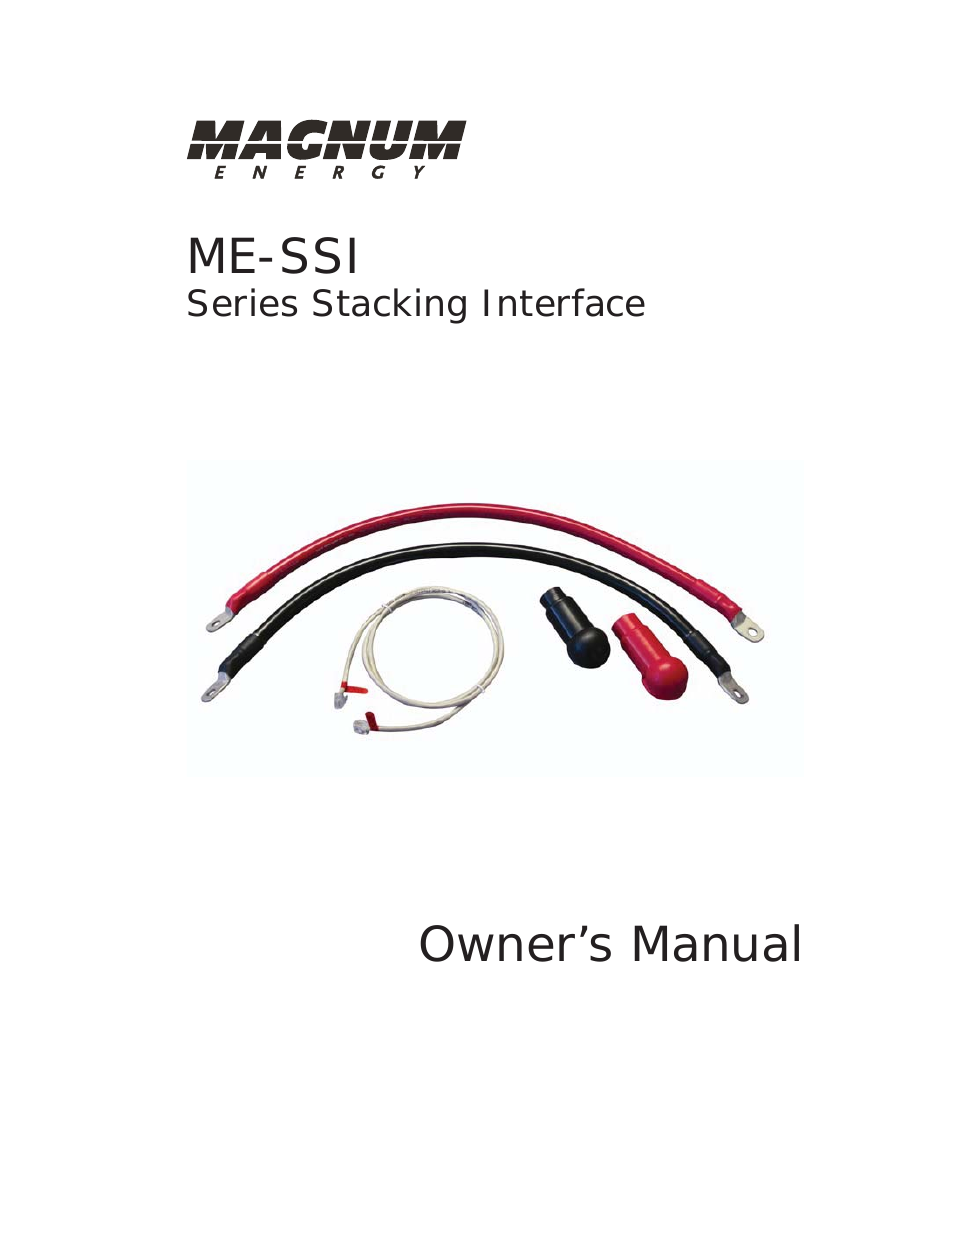 Series Stacking Cable Kit (ME-SSI)